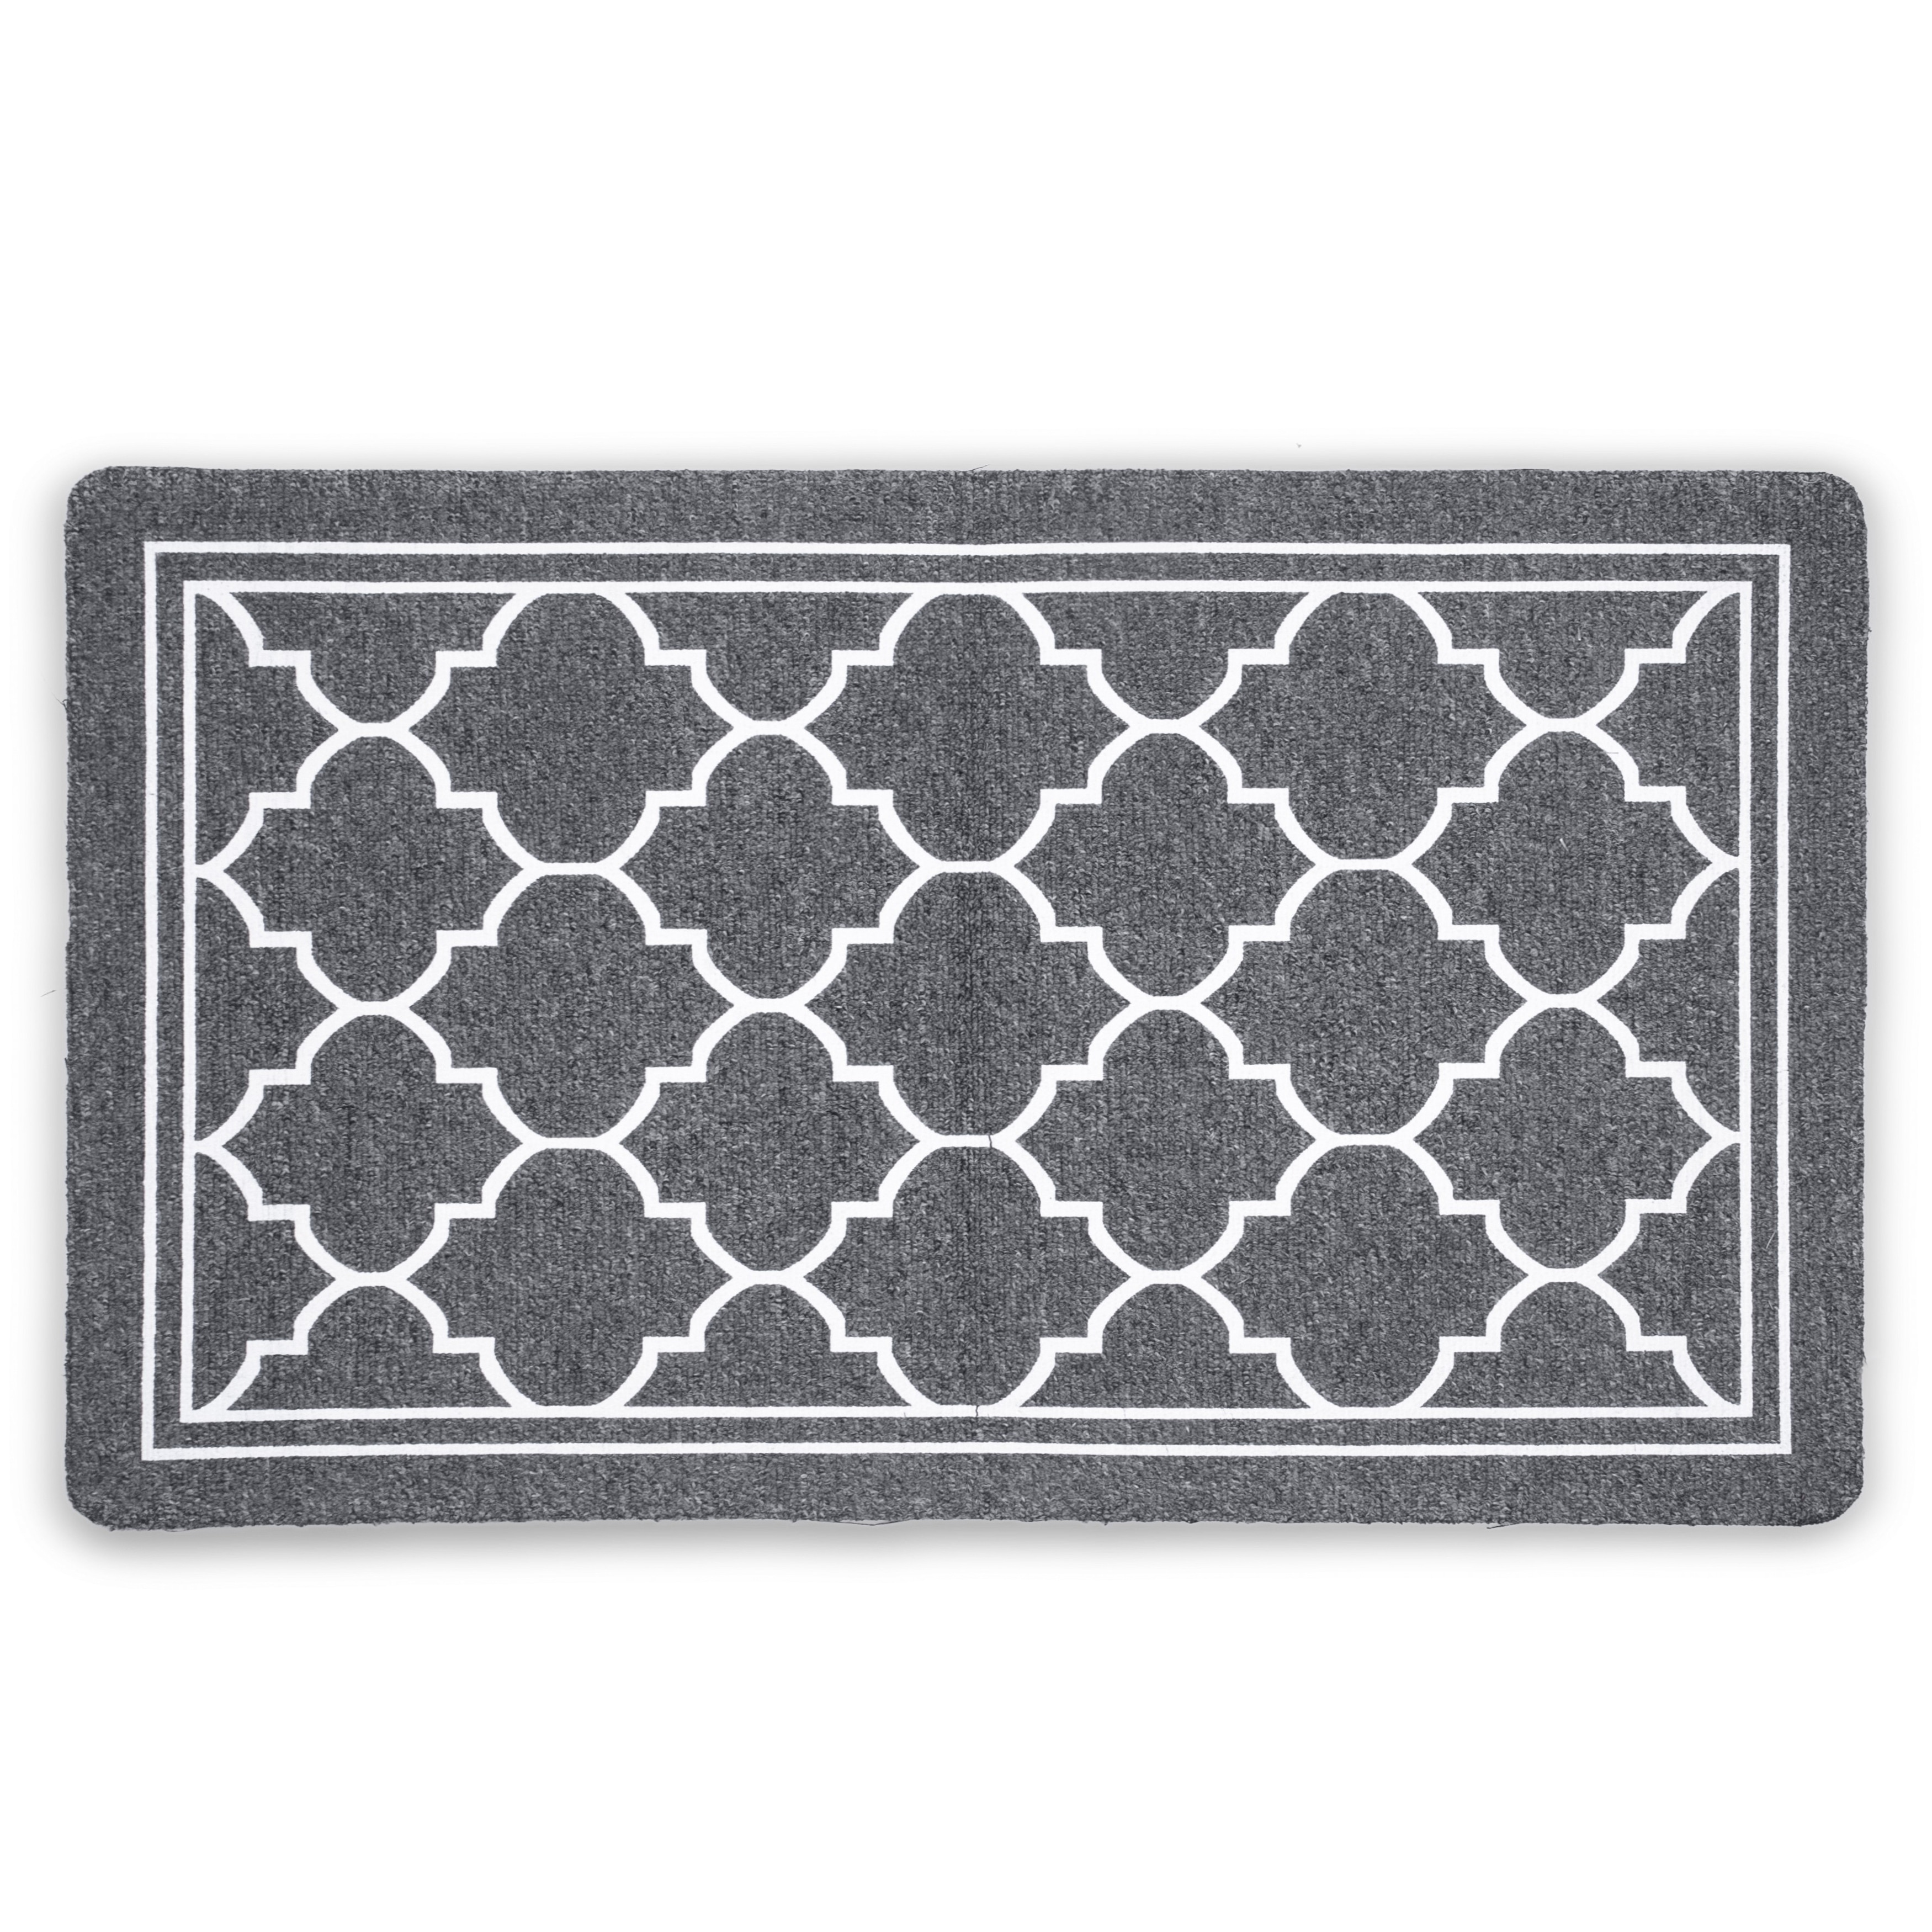  Heavy Duty 30x18 Outdoor Entrance Mat - Waterproof Front Door  Welcome Mat for Home Entry, Dirt Trapper Entryway Rug, Non-Slip Durable Rubber  Back Floor Matts for All Weather - Exterior Doormat 